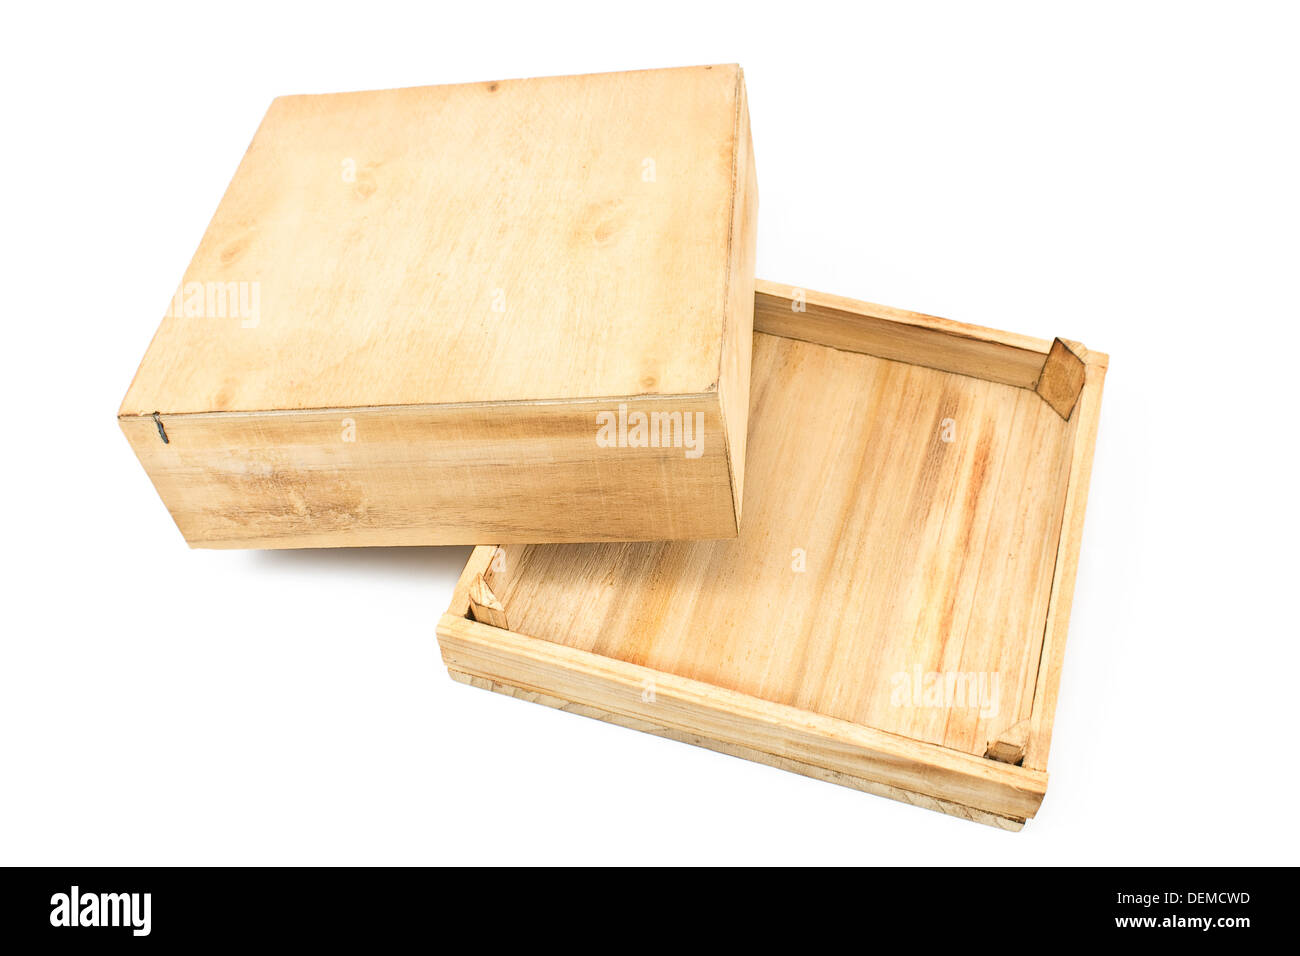 Open wooden box isolated on white Stock Photo